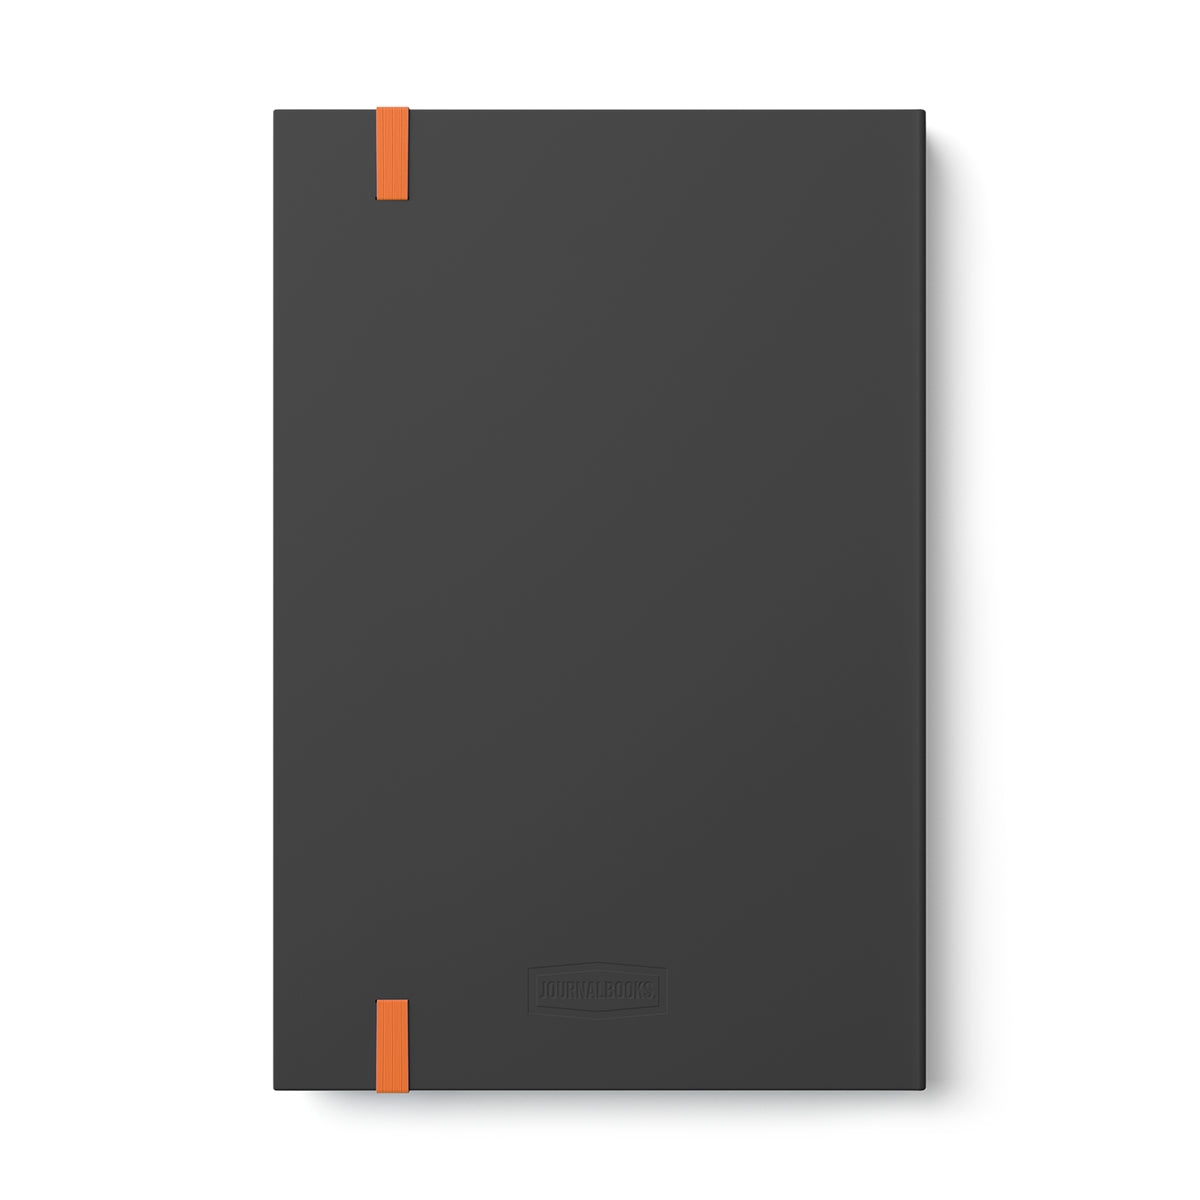 Better Than Our Dogs - Color Contrast Notebook - Ruled